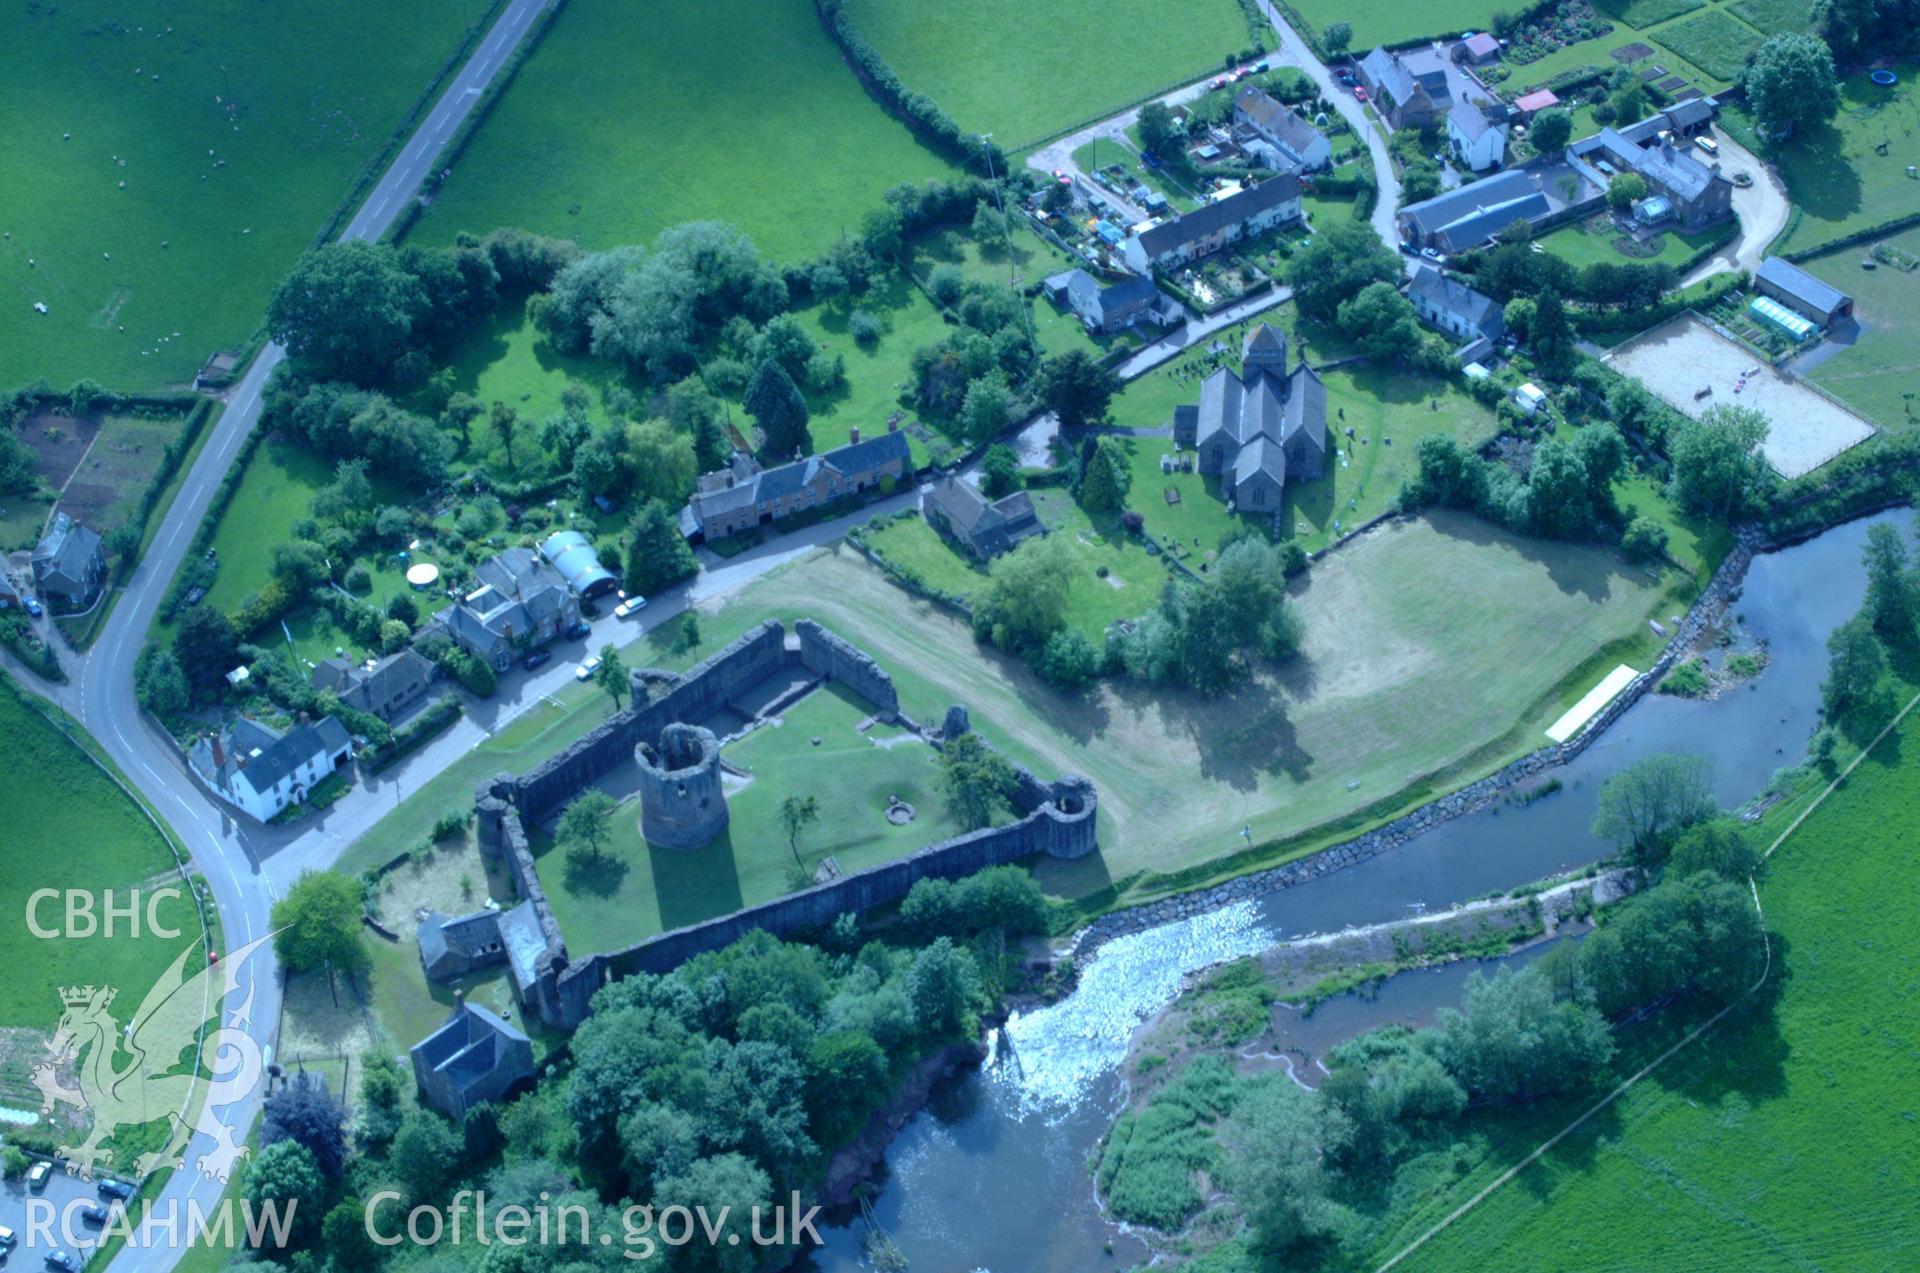 RCAHMW colour oblique aerial photograph of Skenfrith medieval and later settlement taken on 02/06/2004 by Toby Driver